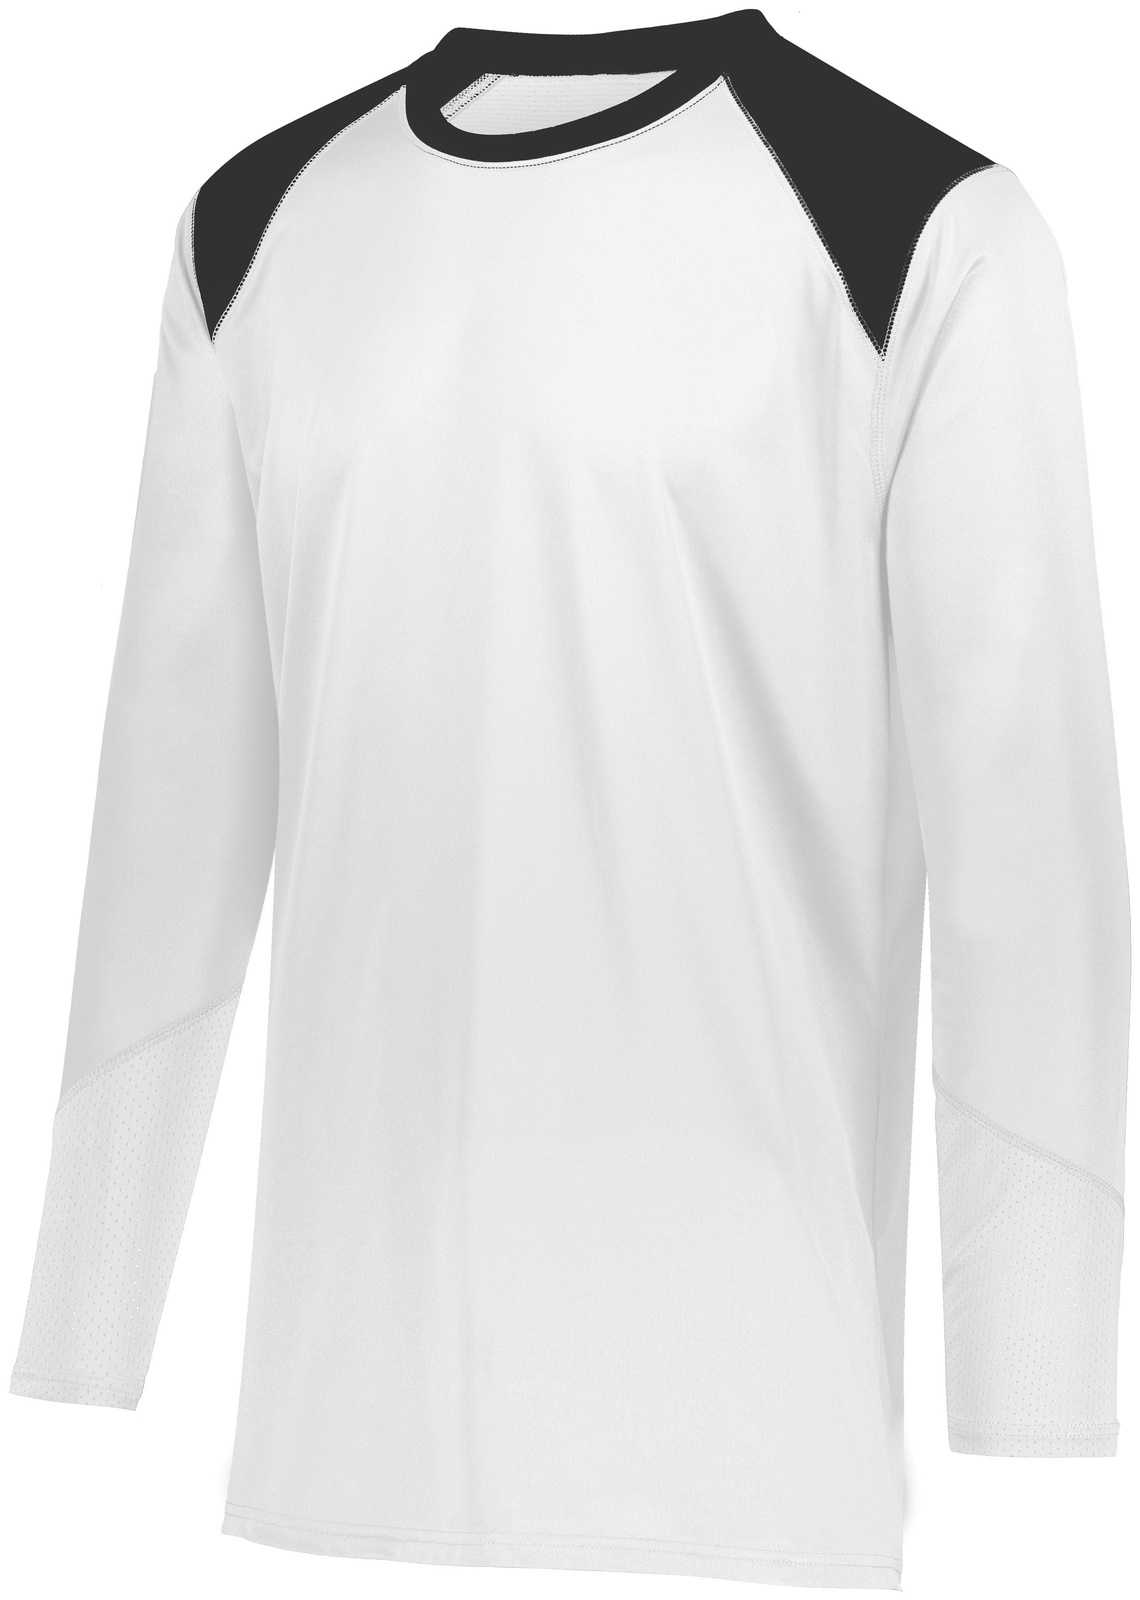 Augusta 1728 Tip-Off Shooter Shirt - White Black - HIT a Double